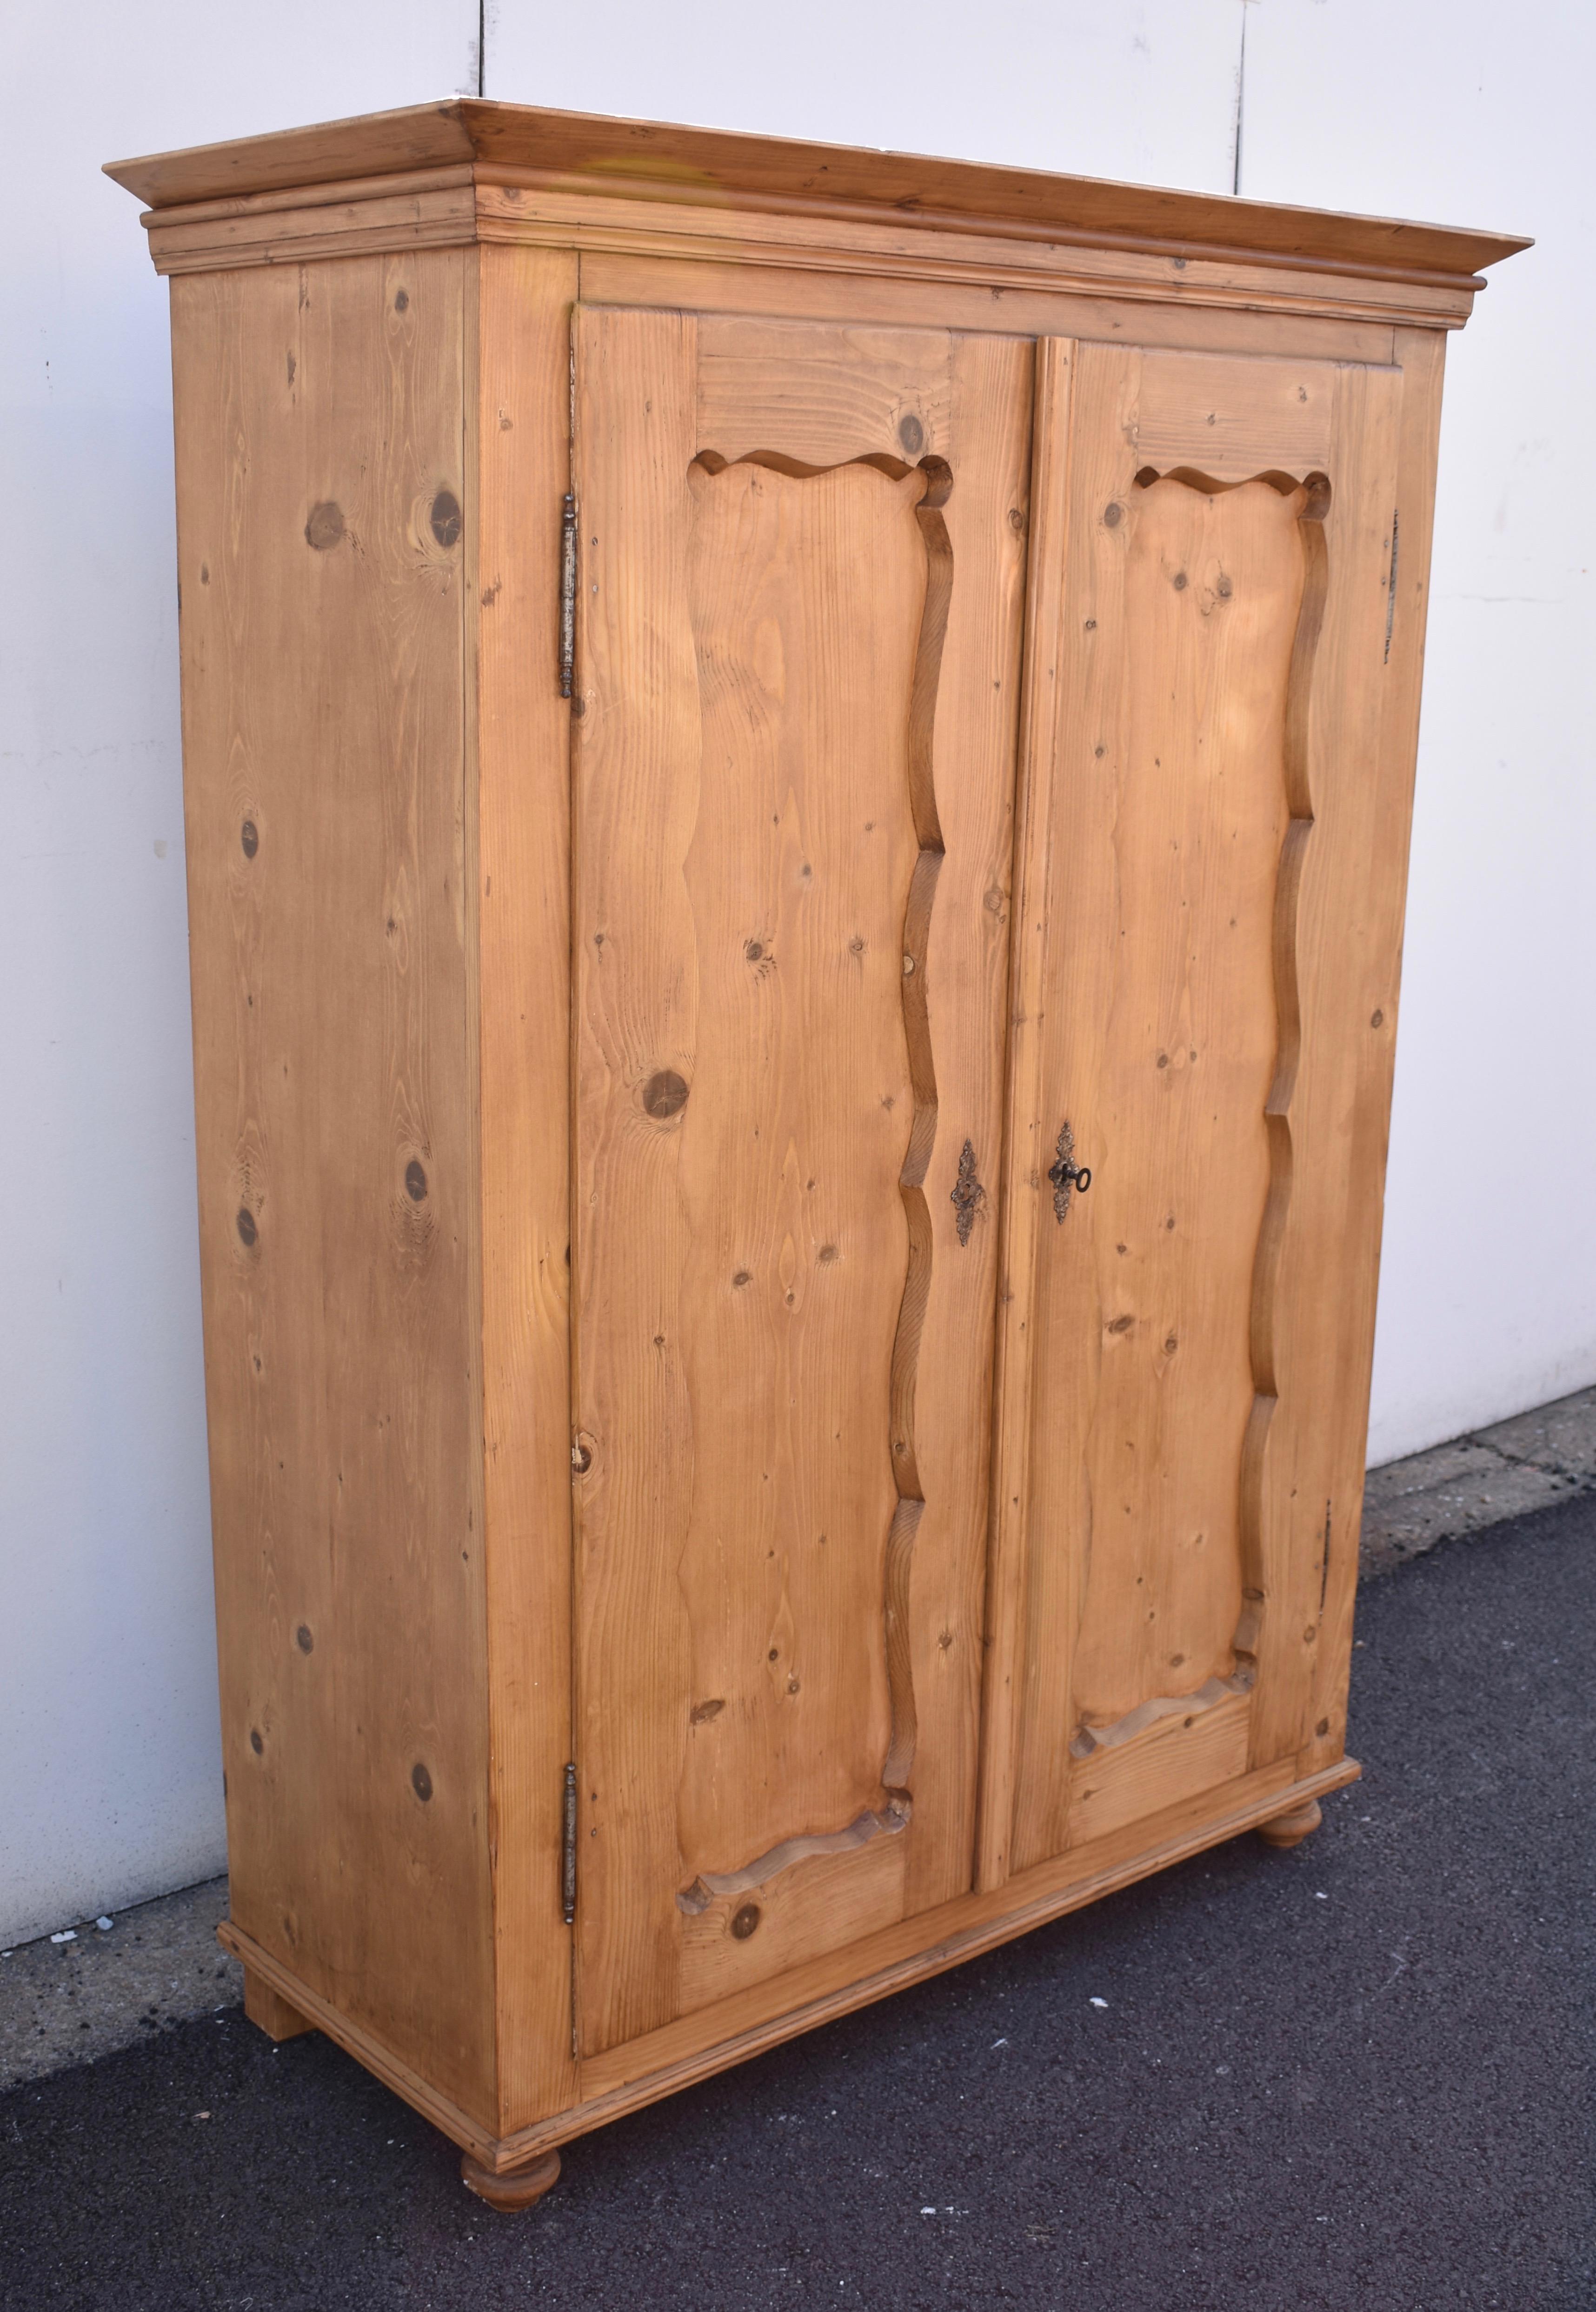 This sturdy little armoire has simple but interesting lines and a beautiful honey color. The crown is plain but elegant with a reeded frieze beneath the flat corona molding. The case is entirely without adornment. The two doors are mounted on